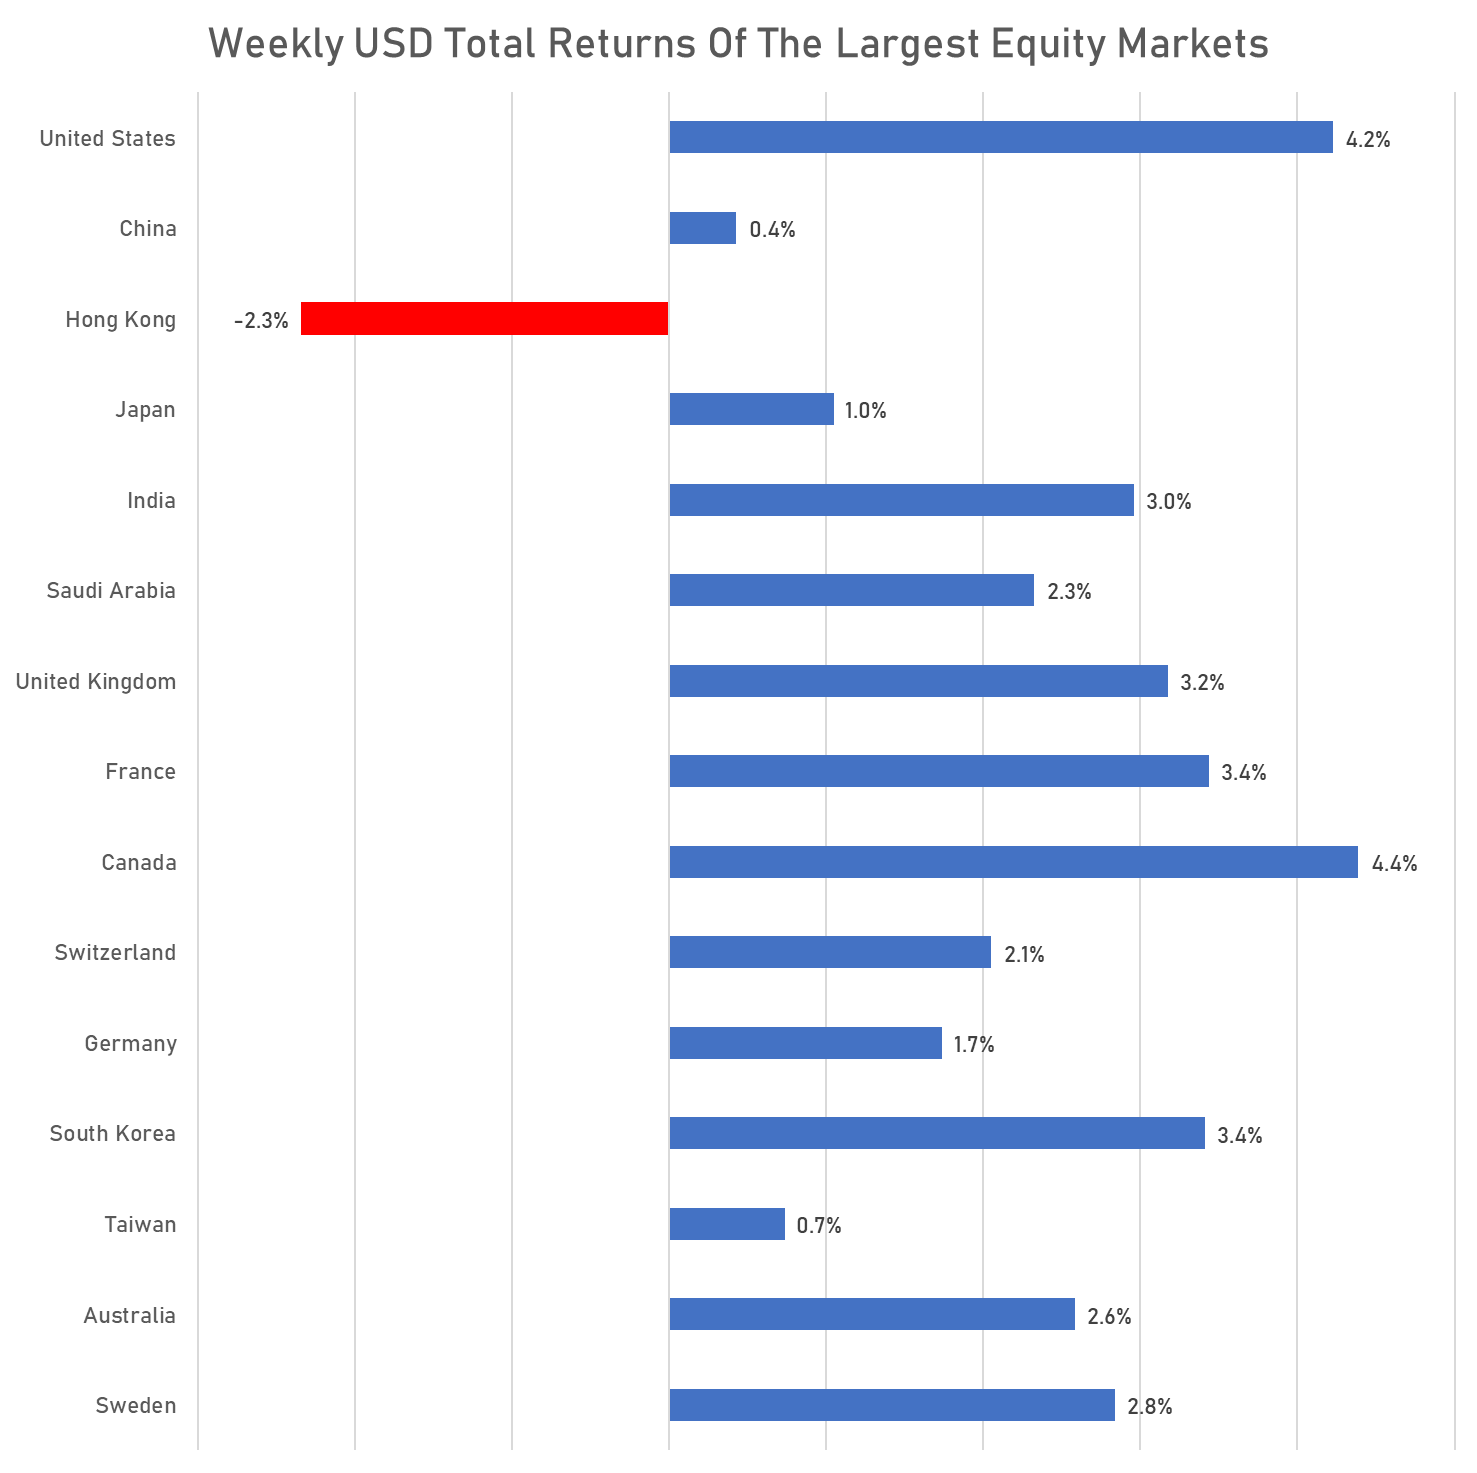 Weekly Performance (US$ Total Returns) OF the Largest Equity Markets | Sources: phipost.com, FactSet data